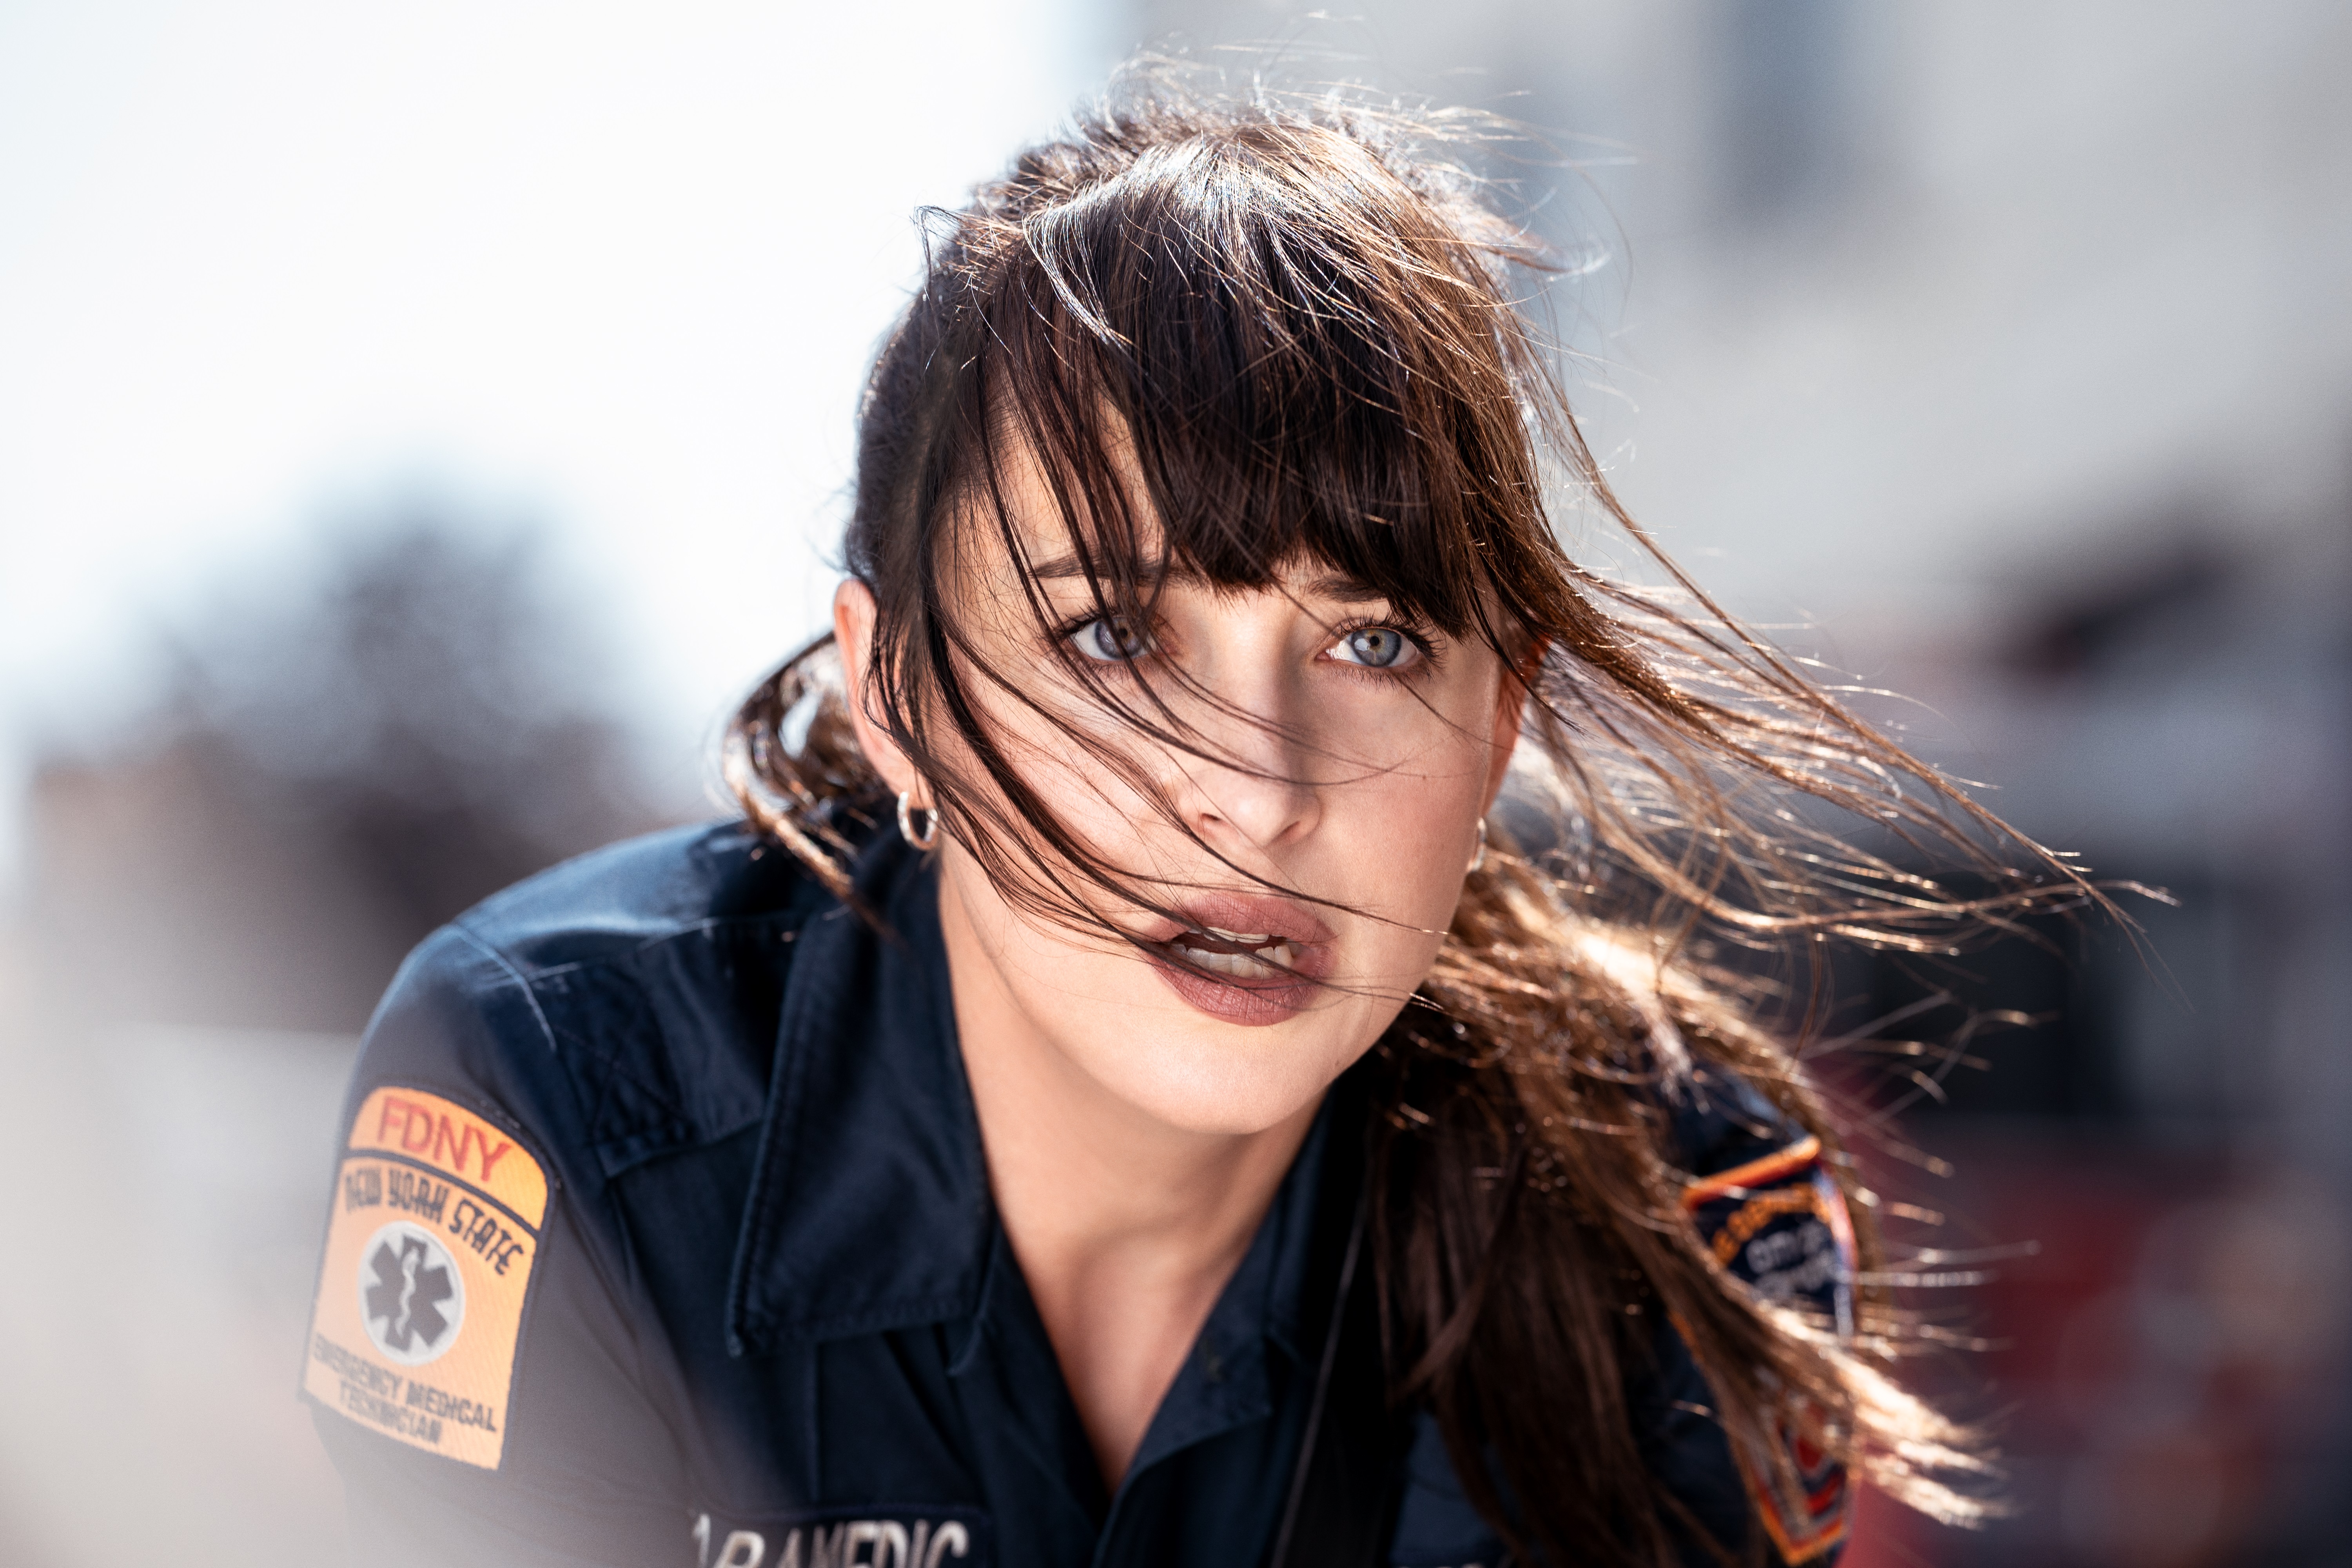 A person in a dark blue FDNY*EMS uniform stands with windblown hair, the blurred background suggesting an outdoor urban setting. Patches on the uniform, including the Star of Life symbol and an American flag, indicate their role in emergency medical services.